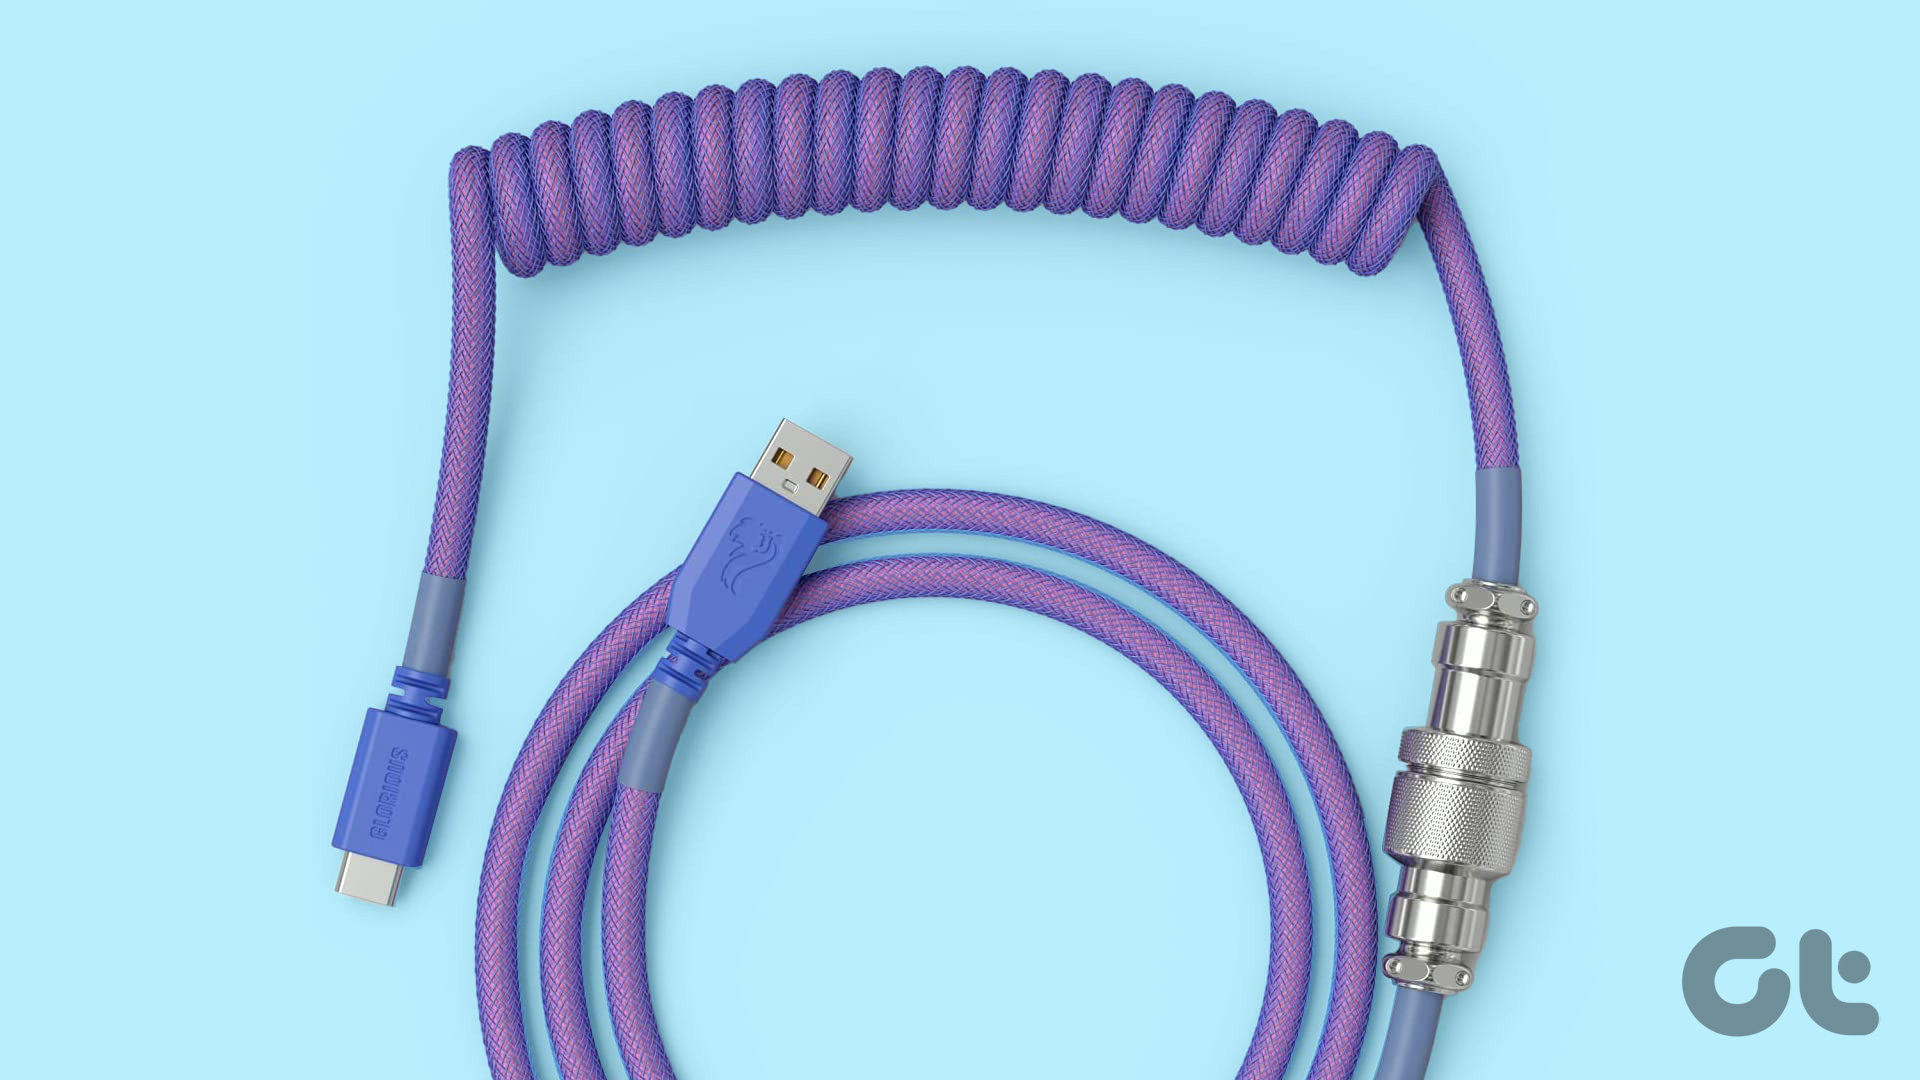 Best Custom Coiled Cables for keyboard